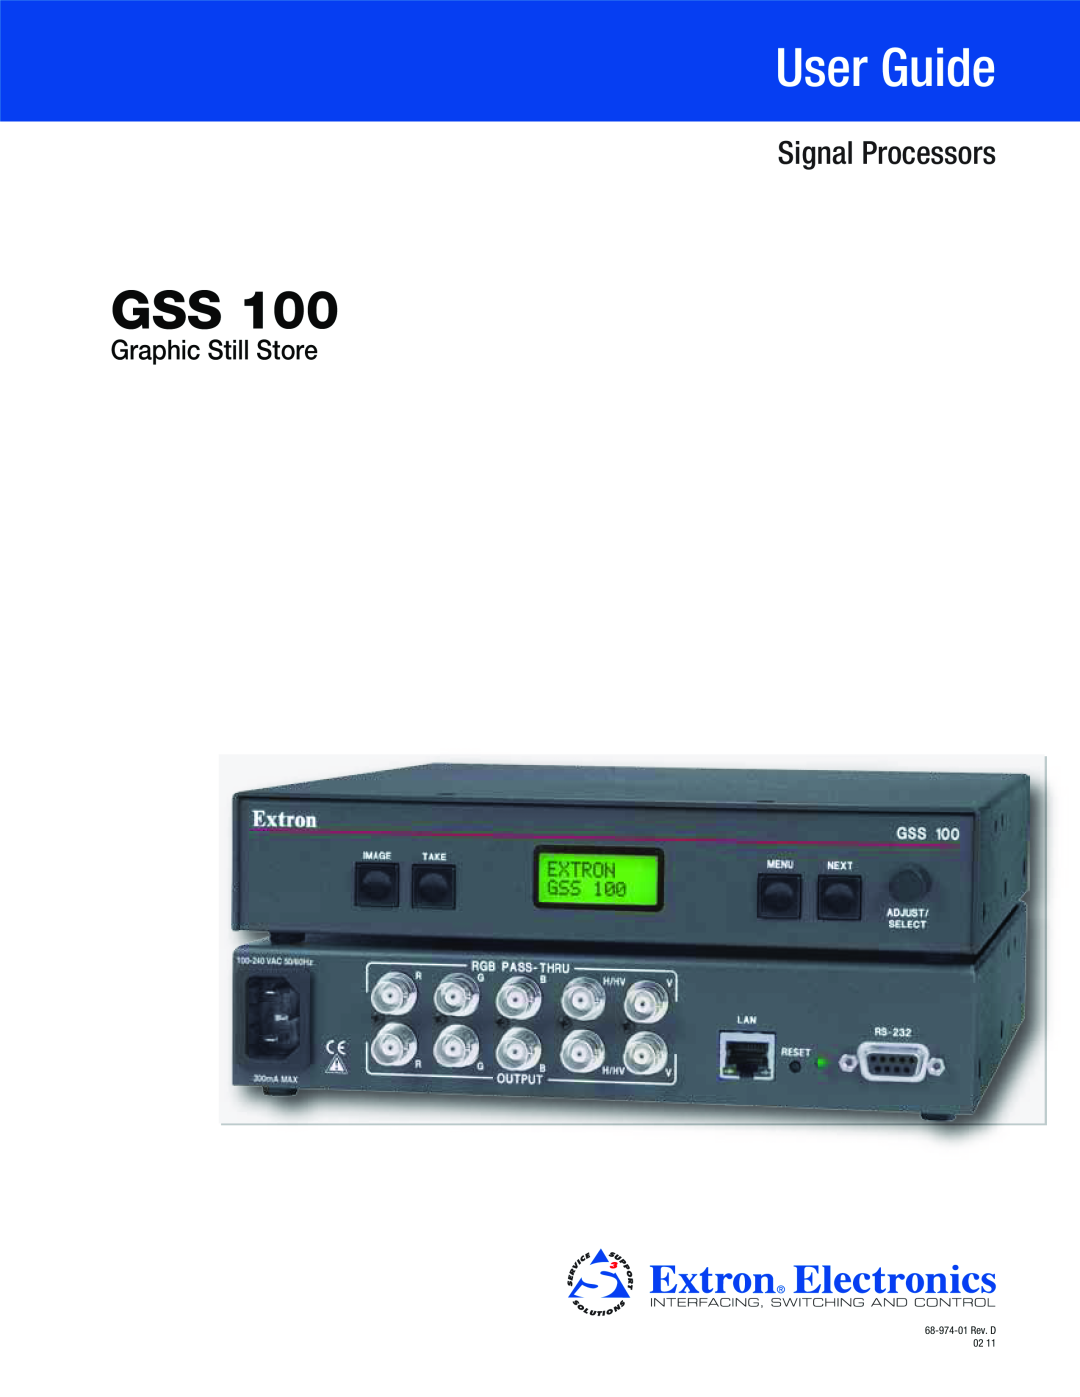 Extron electronic GSS 100 manual User Guide, Signal Processors, Graphic Still Store, 68-974-01Rev. D 